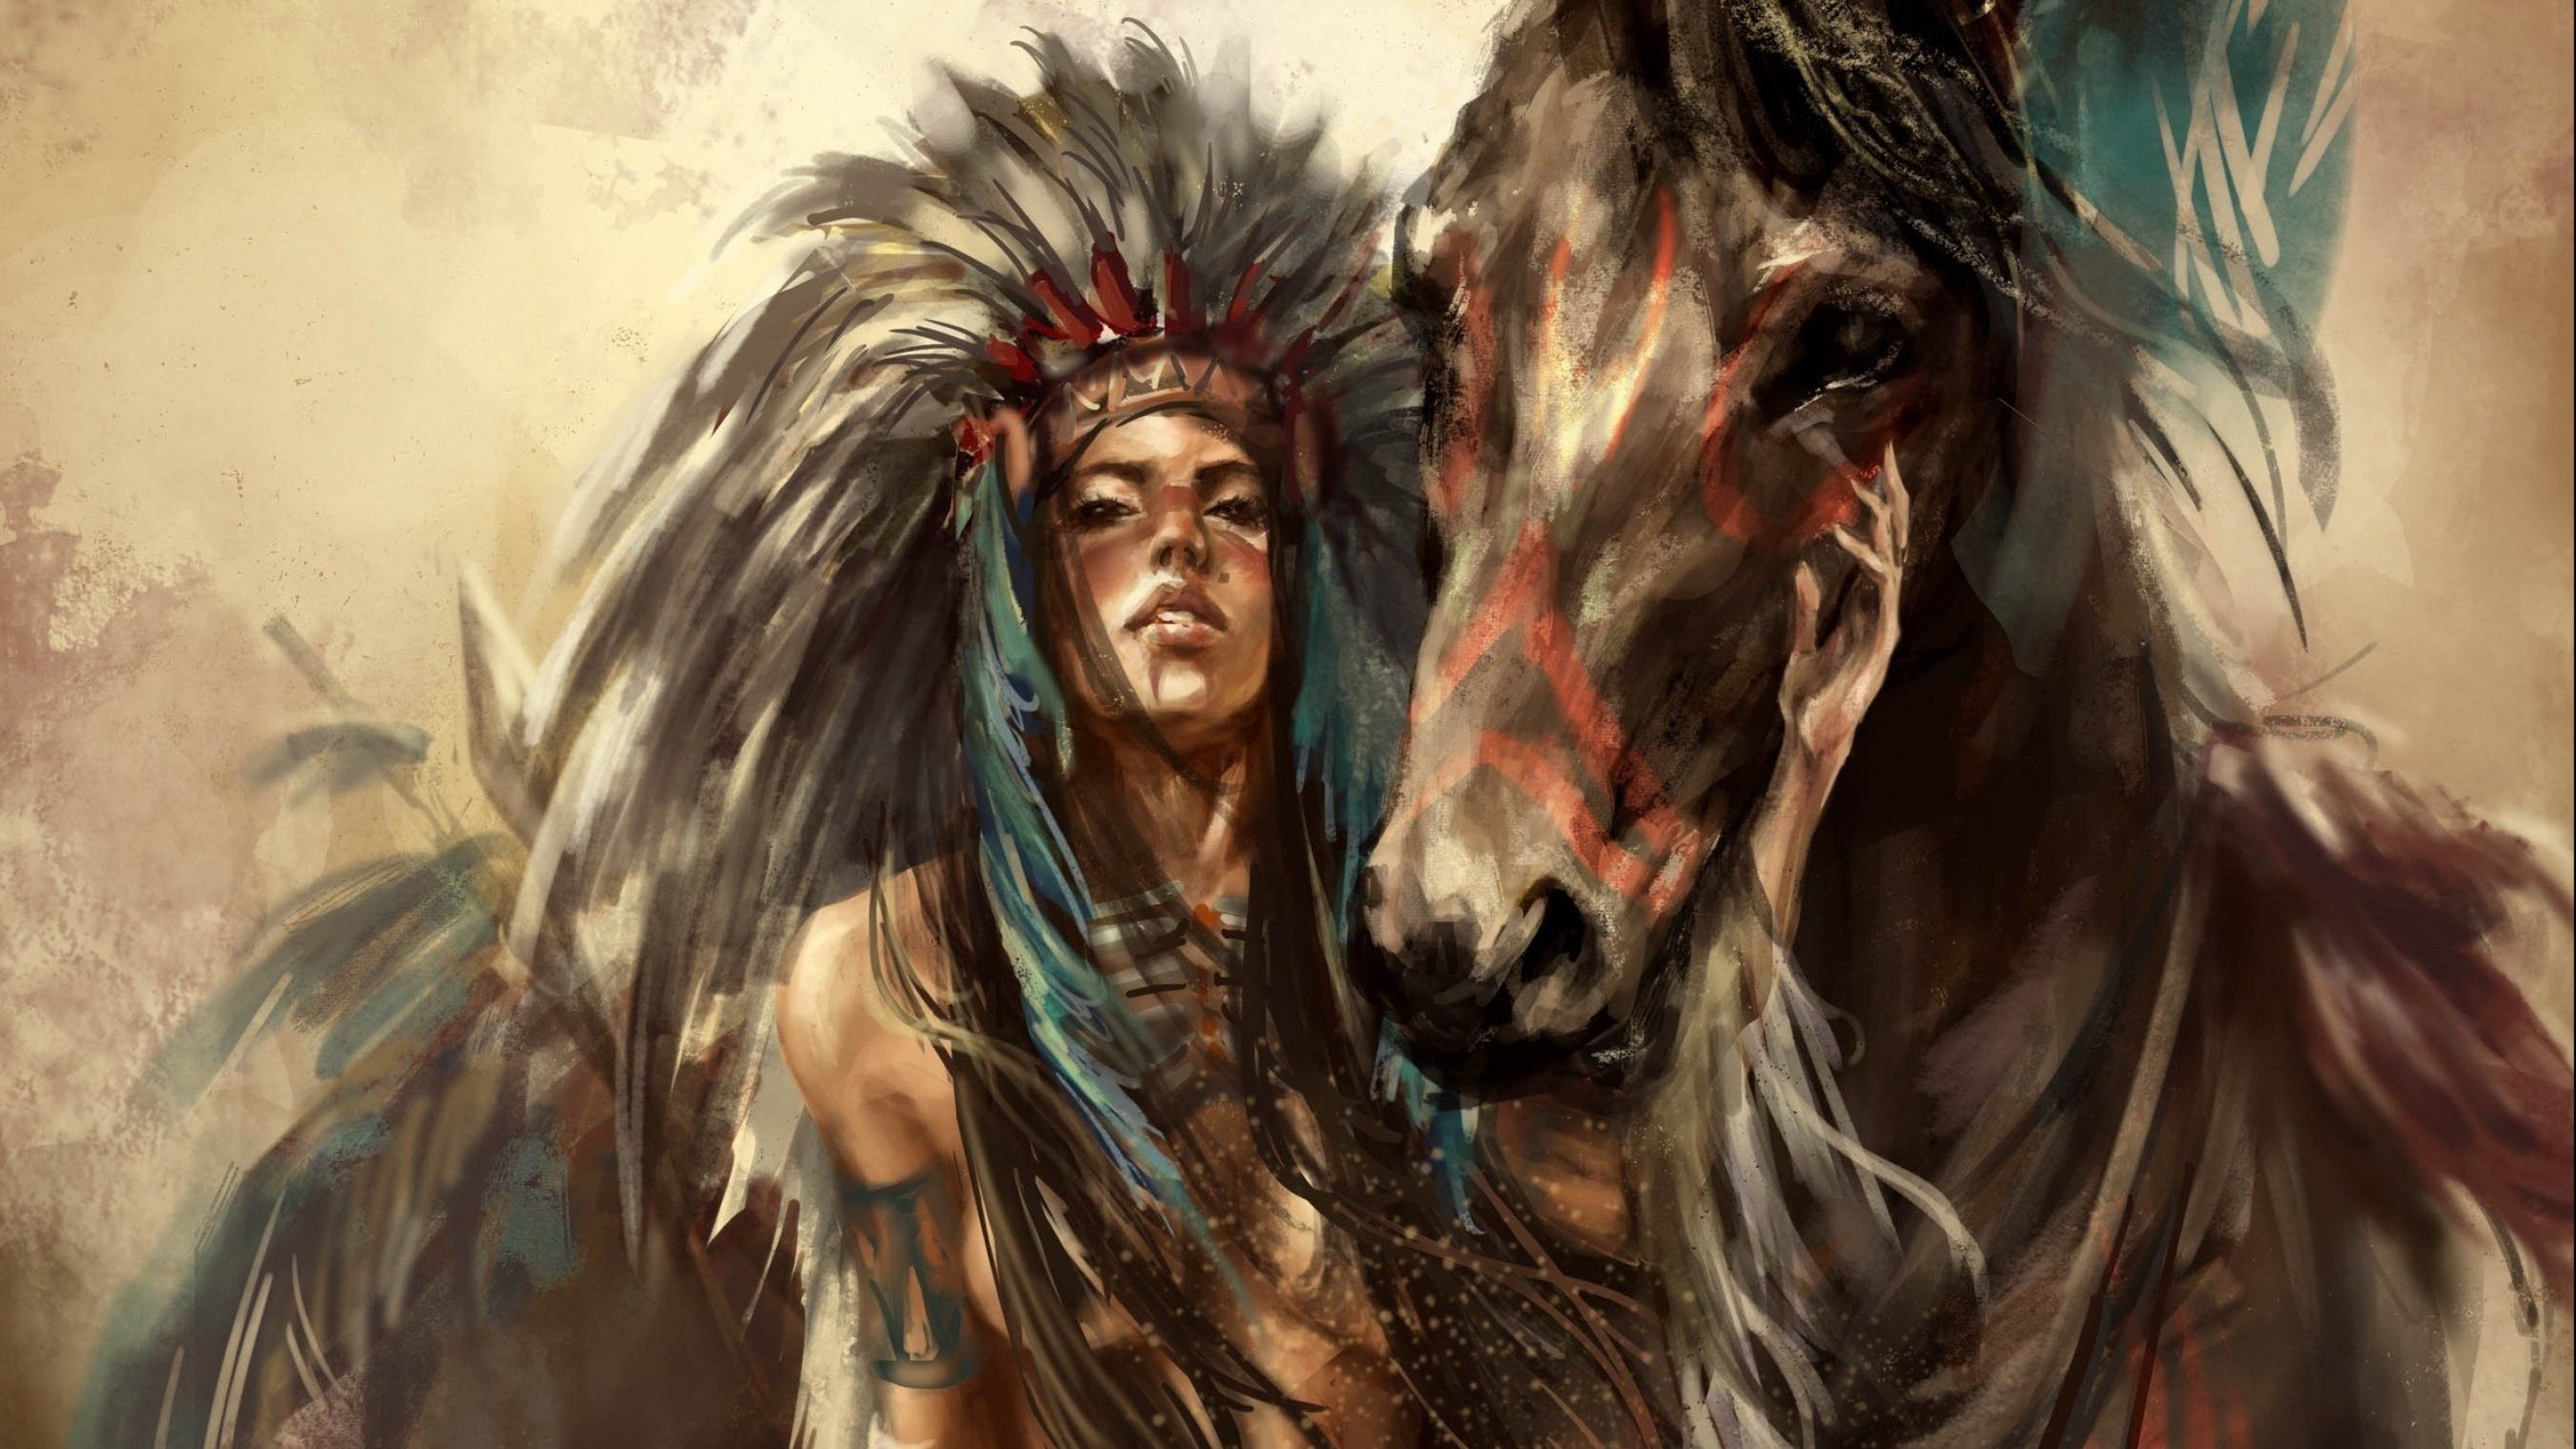 Native American Indian HD Images Wallpapers 12995 - HD Wallpapers Site